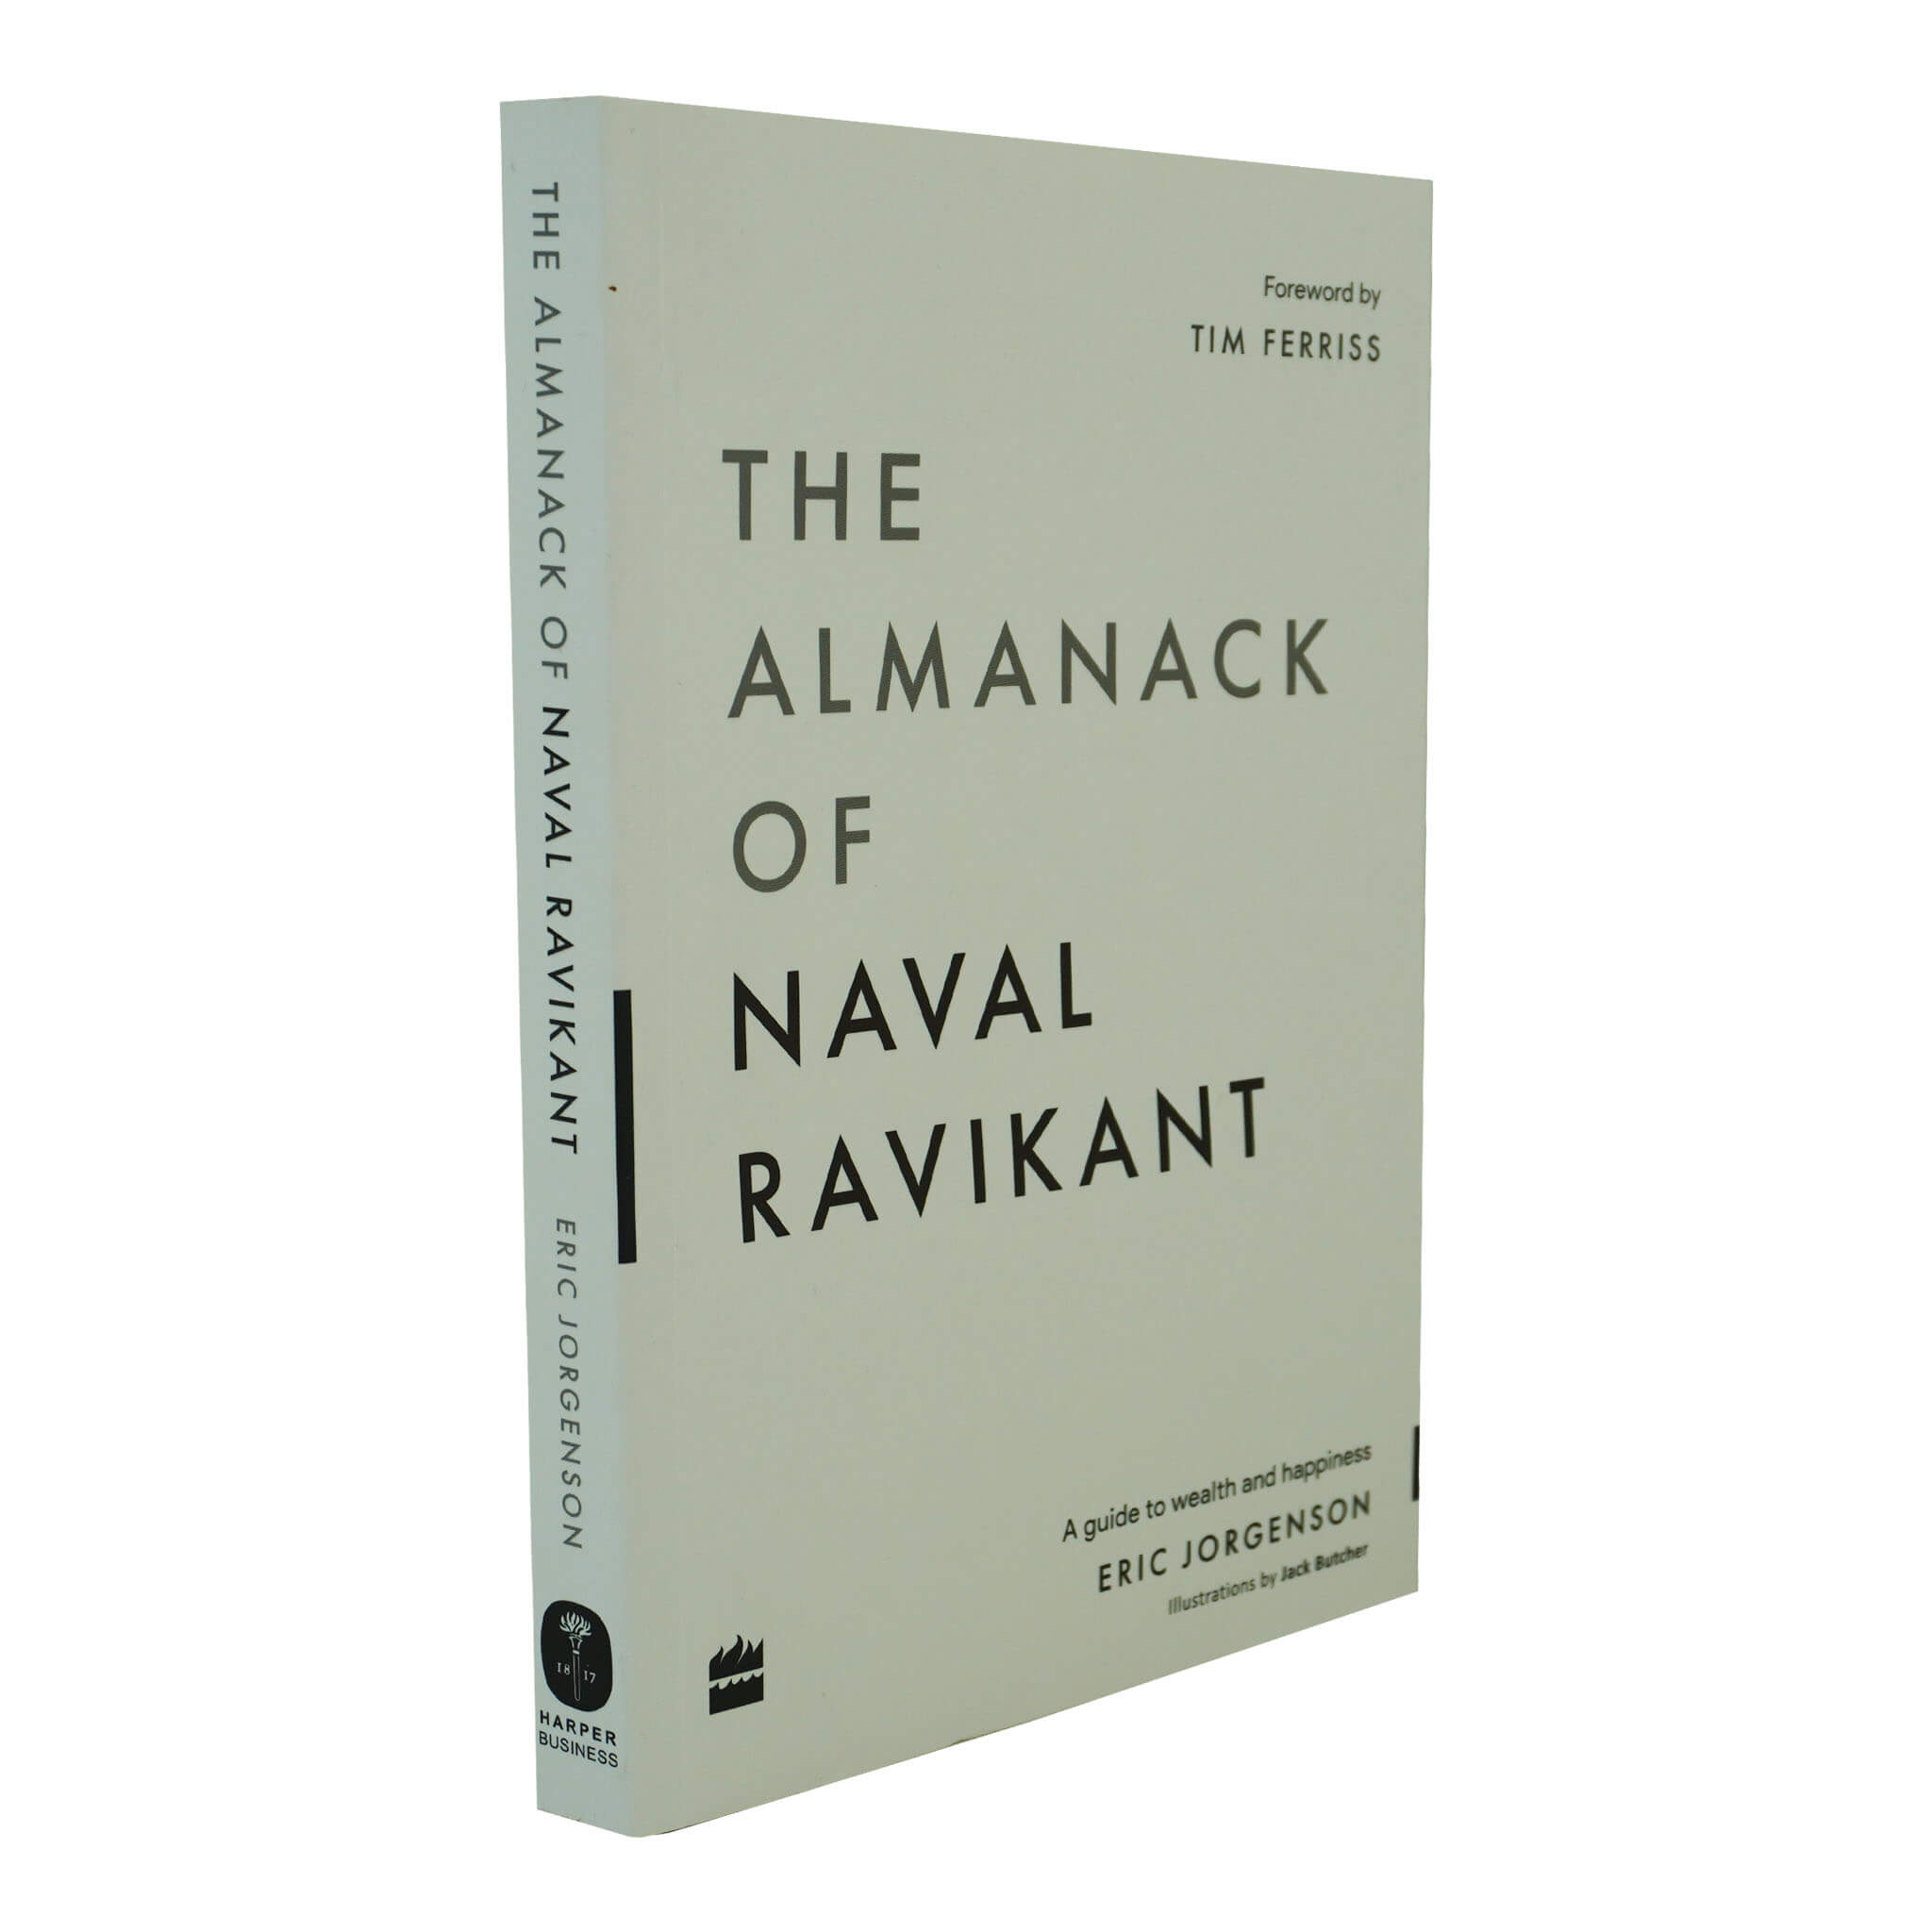 A Review: The Almanack of Naval Ravikant, by Chukwudike